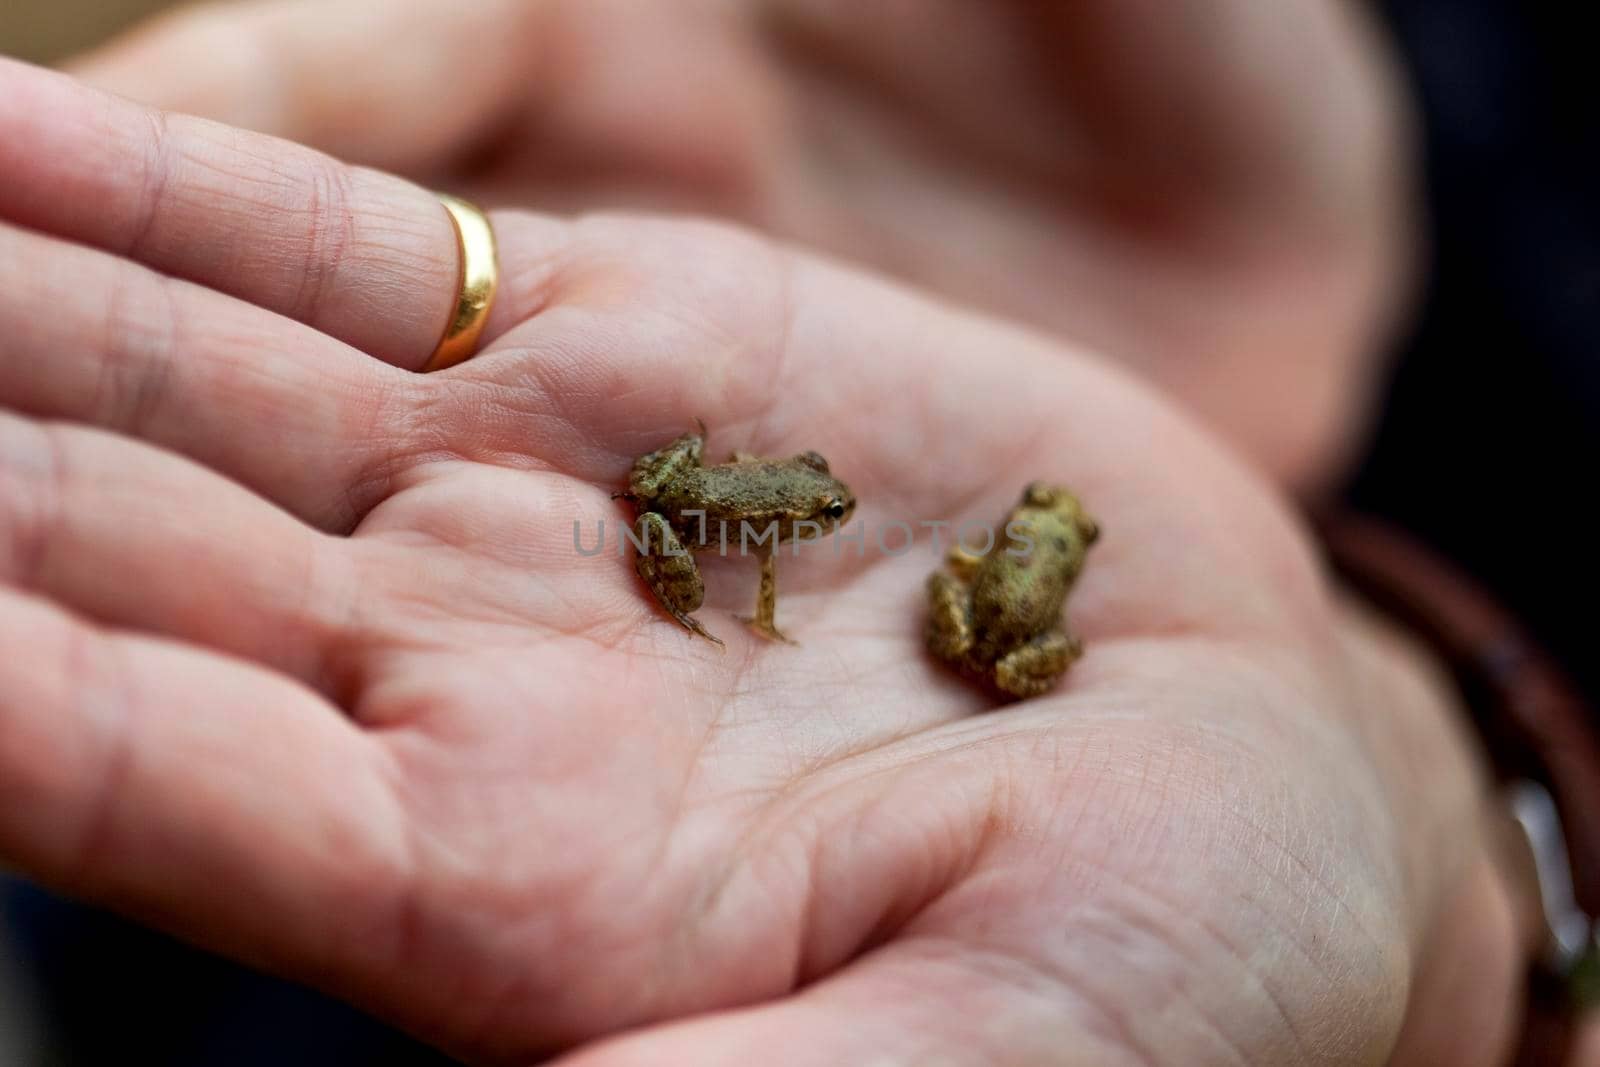 Close up of two frogs meeting in a hand